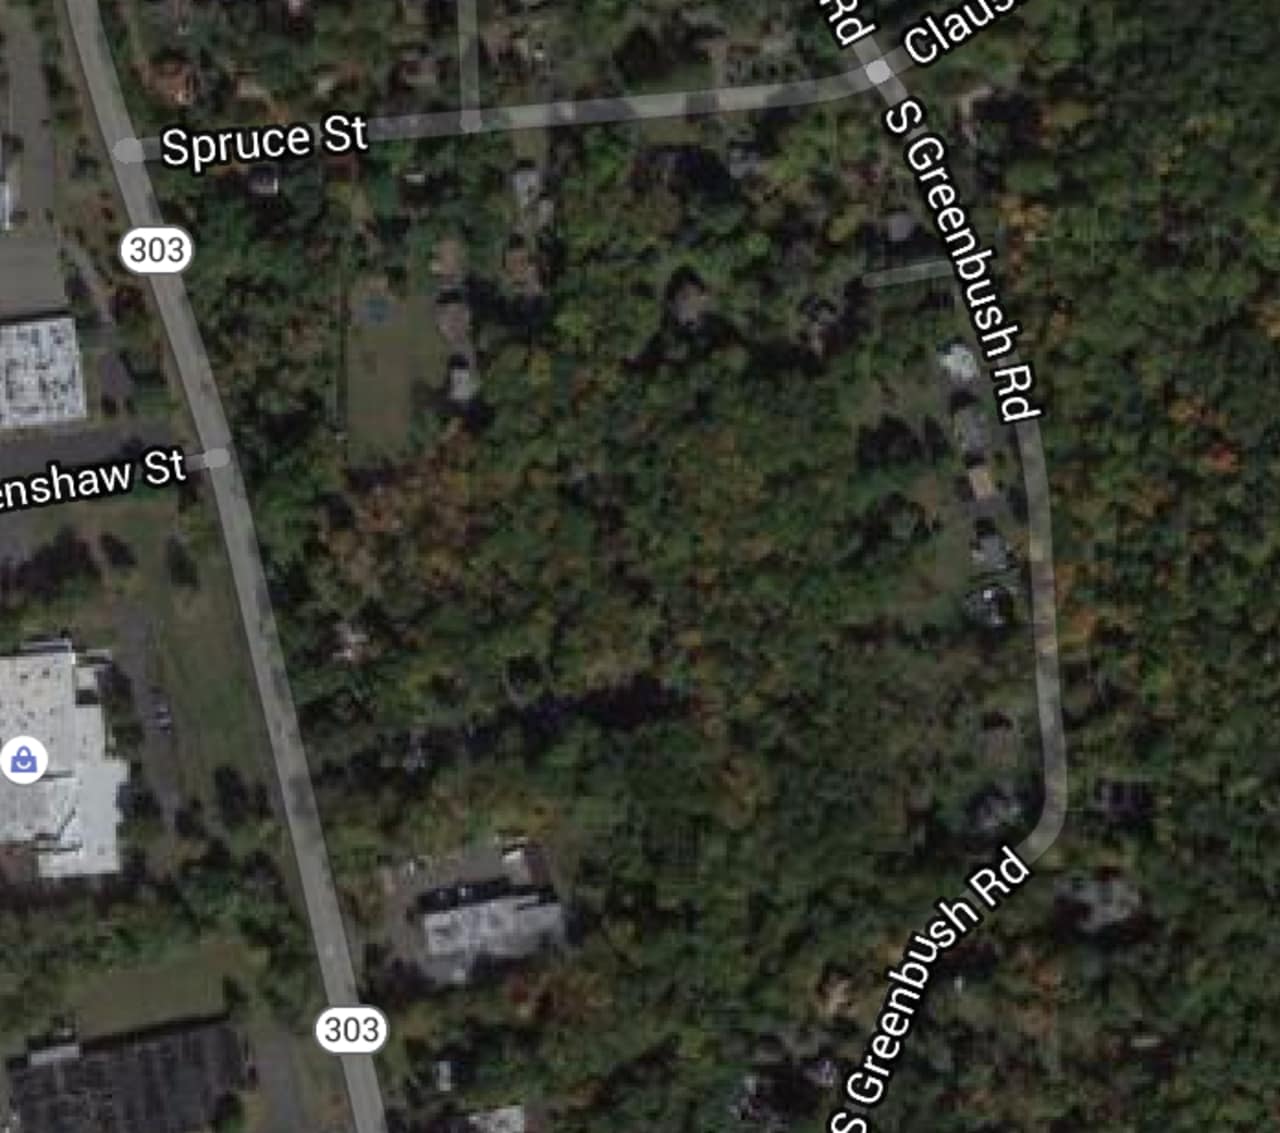 The closure is between Spruce Street and Route 303.